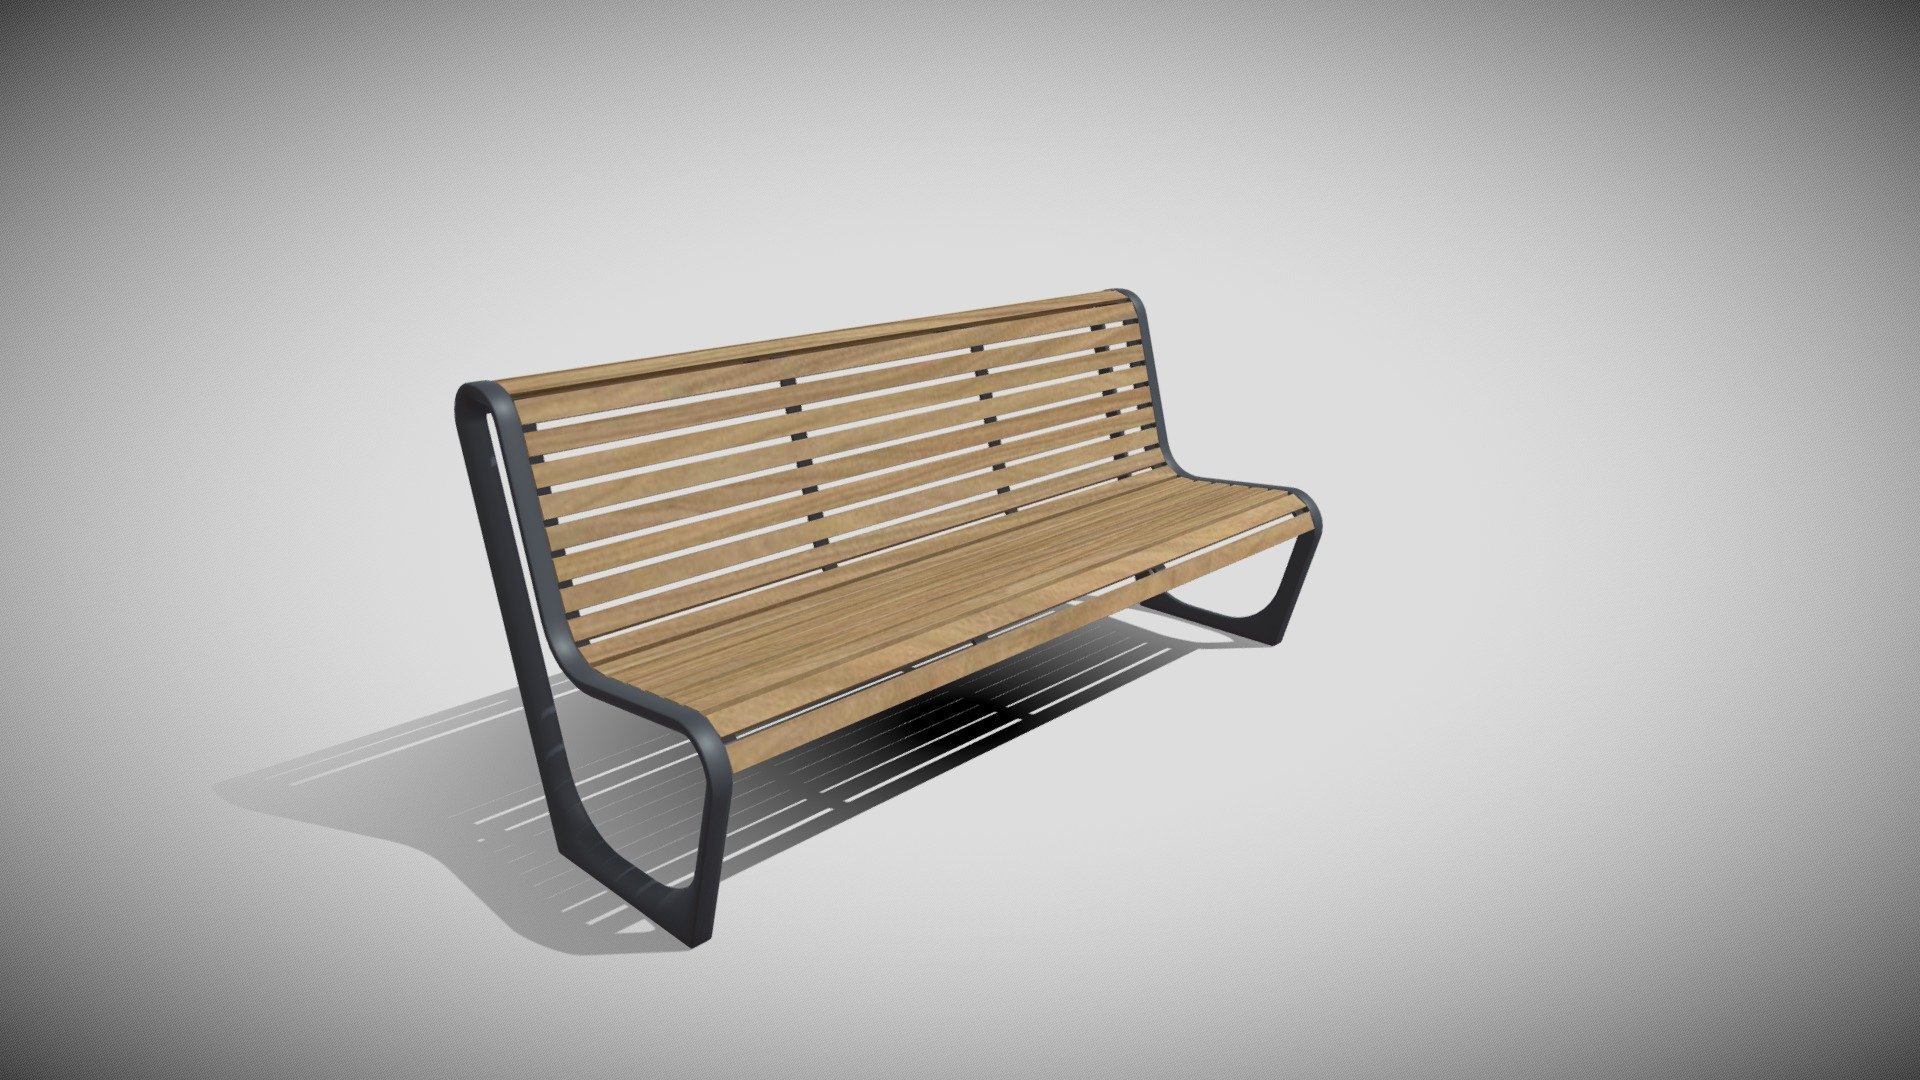 Detailed model of a Park Bench, modeled in Cinema 4D.The model was created using approximate real world dimensions.

The model has 18,462 polys and 17,768 vertices.

An additional file has been provided containing the original Cinema 4D project file, textures and other 3d export files such as 3ds, fbx and obj 3d model